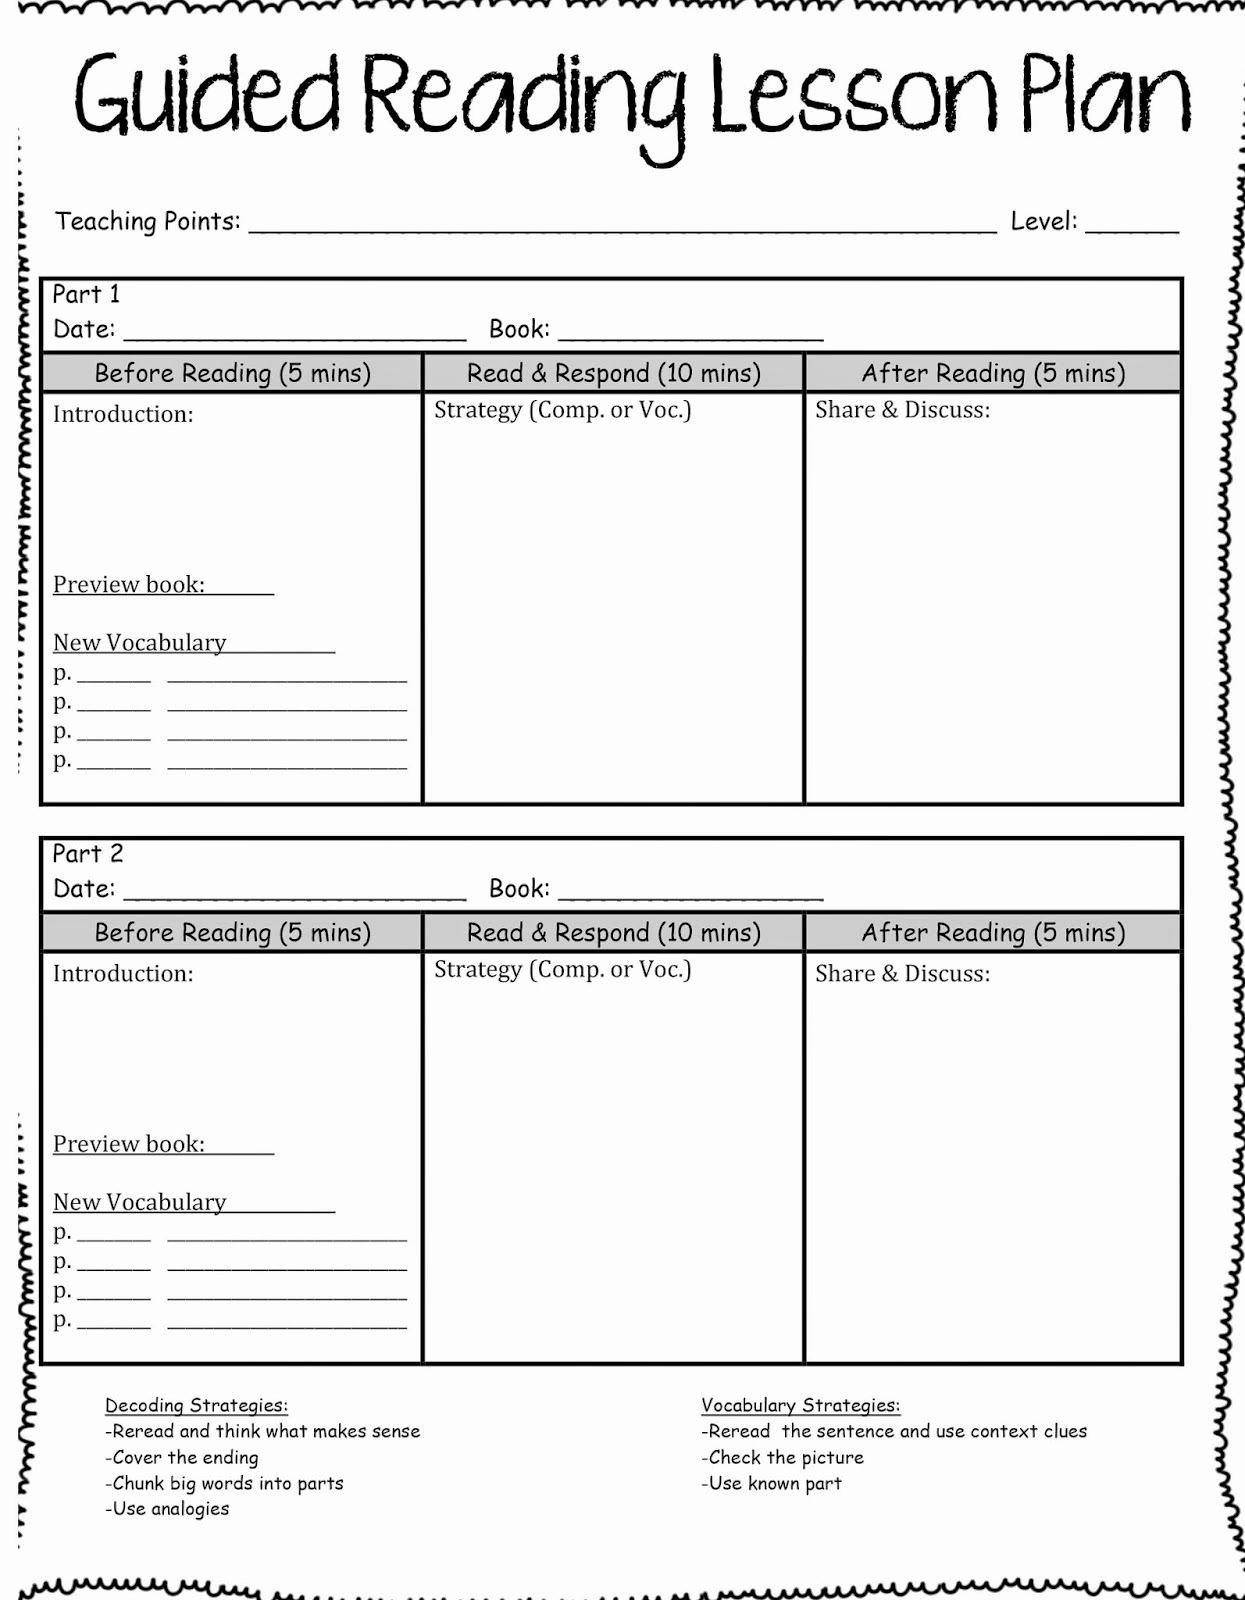 Guided Math Lesson Plan Template Beautiful Guided Reading Lesson Plans Guided Reading Lesson Plan